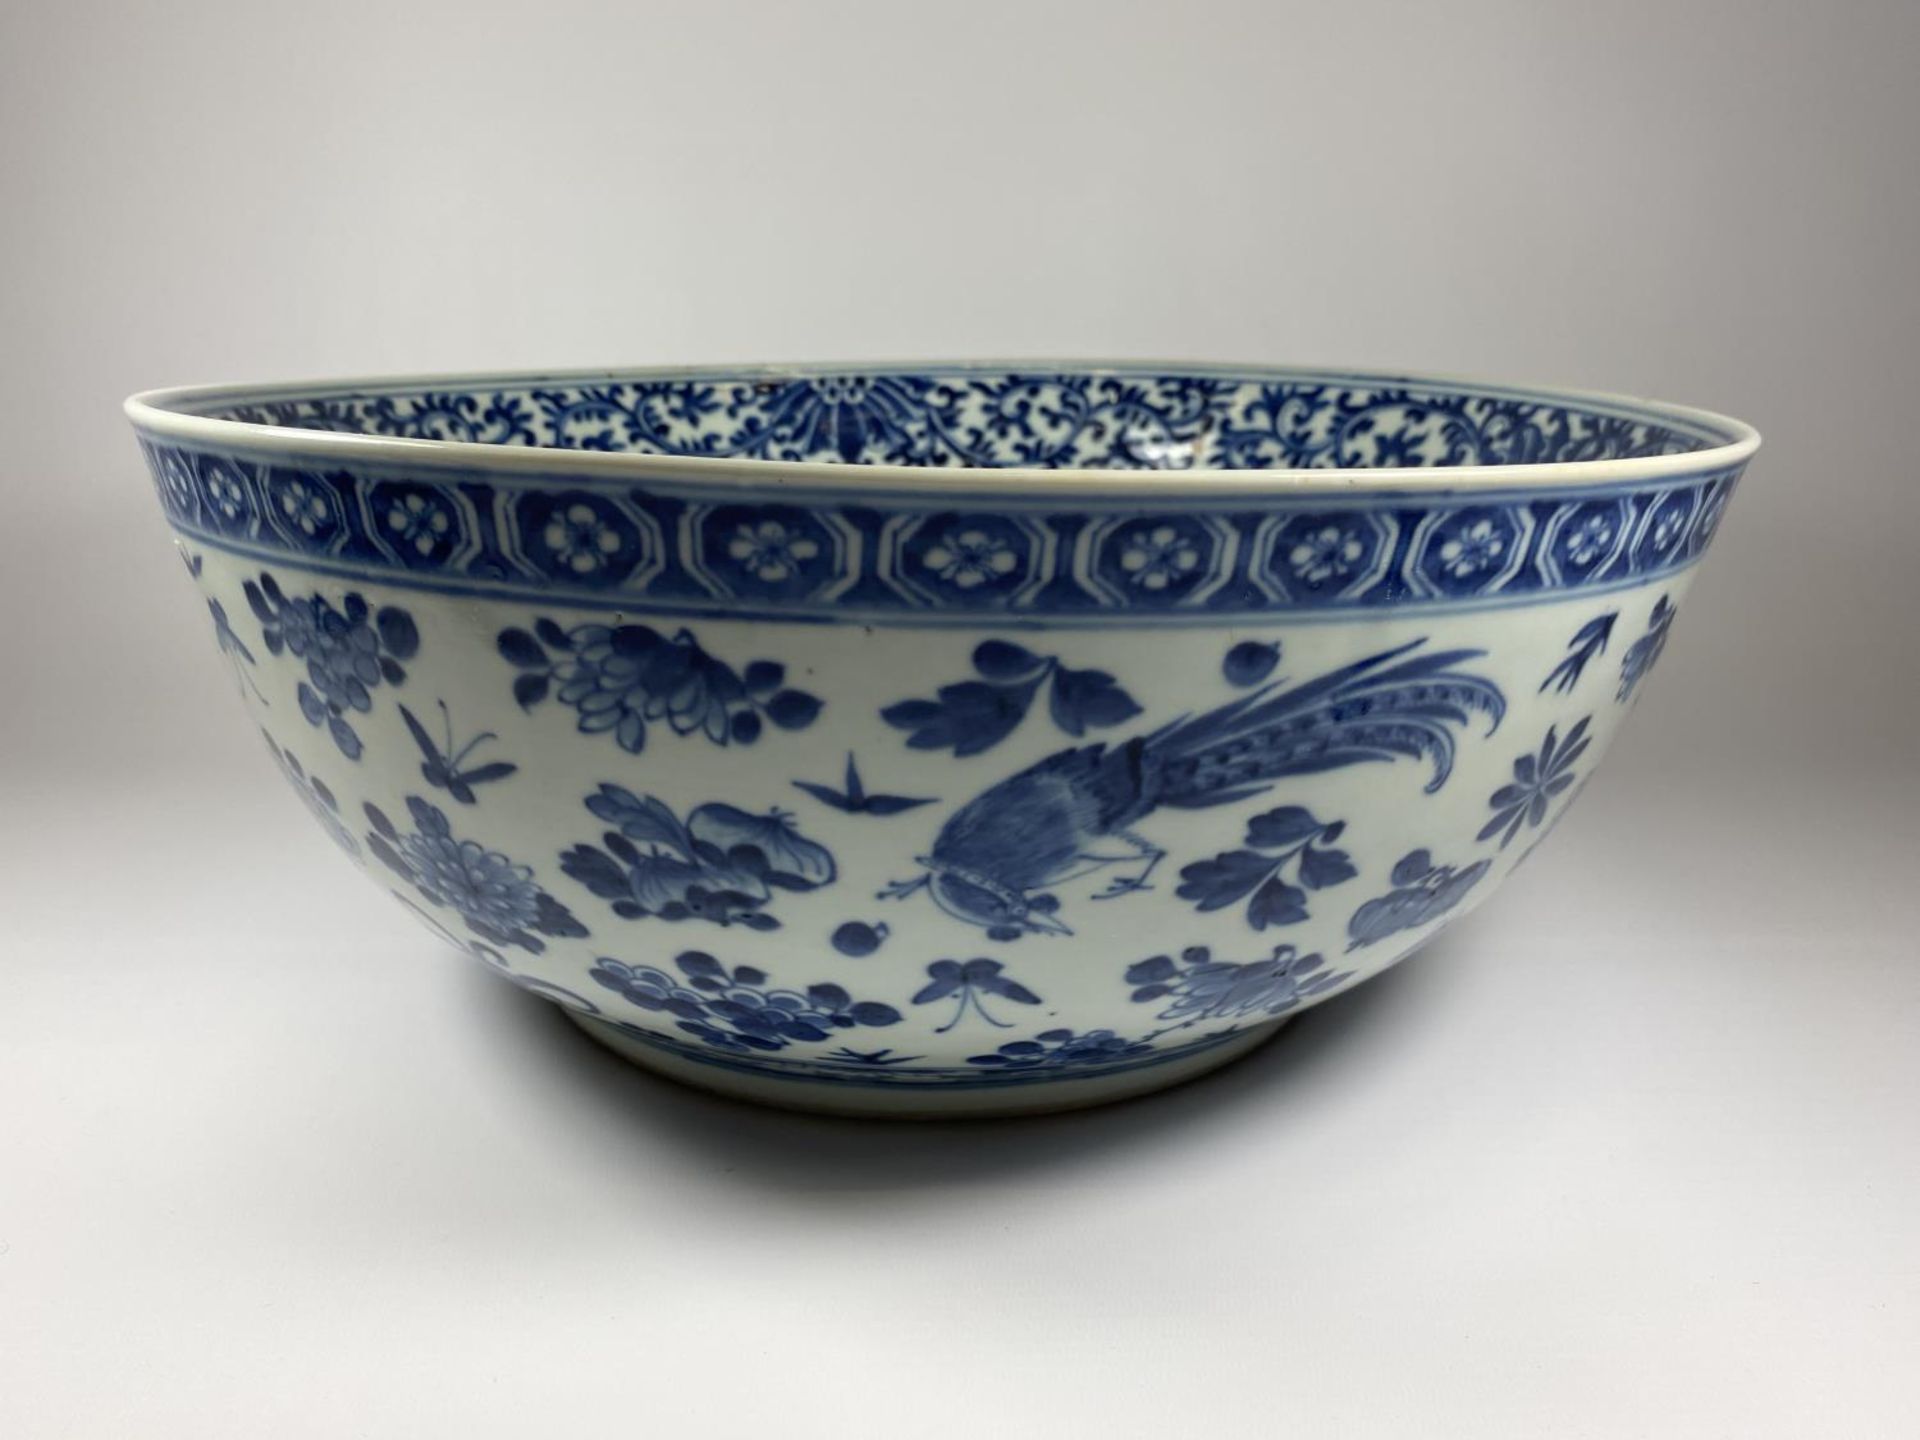 A LARGE AND IMPRESSIVE EARLY 19TH CENTURY CHINESE QING BLUE AND WHITE PORCELAIN PUNCH / FRUIT BOWL - Image 2 of 14